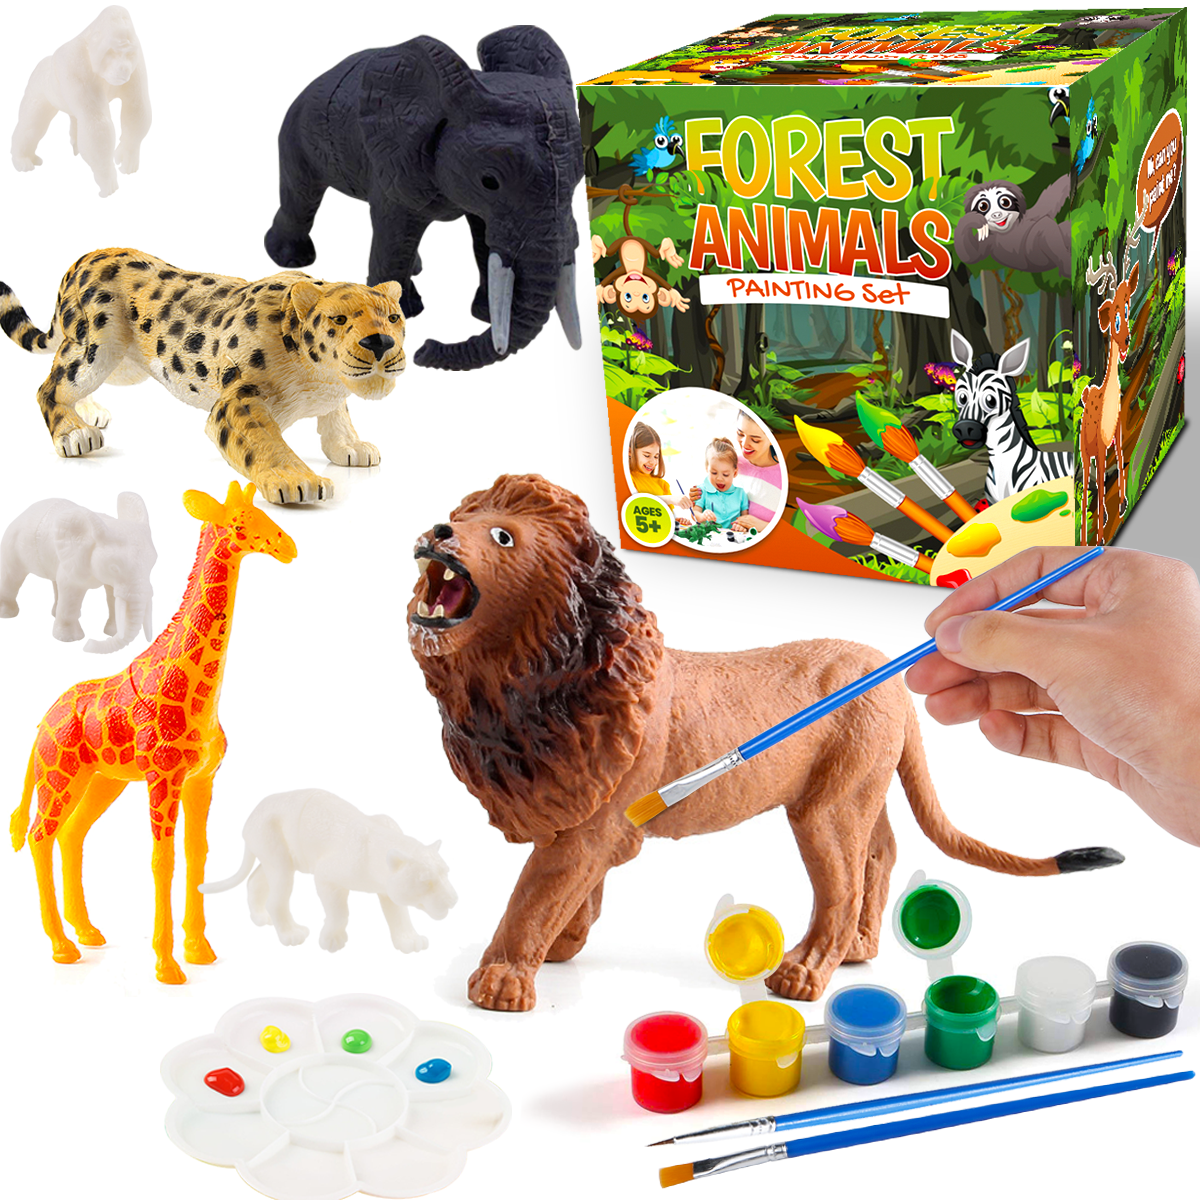 Paint Your Own Forest Animals Painting Kit